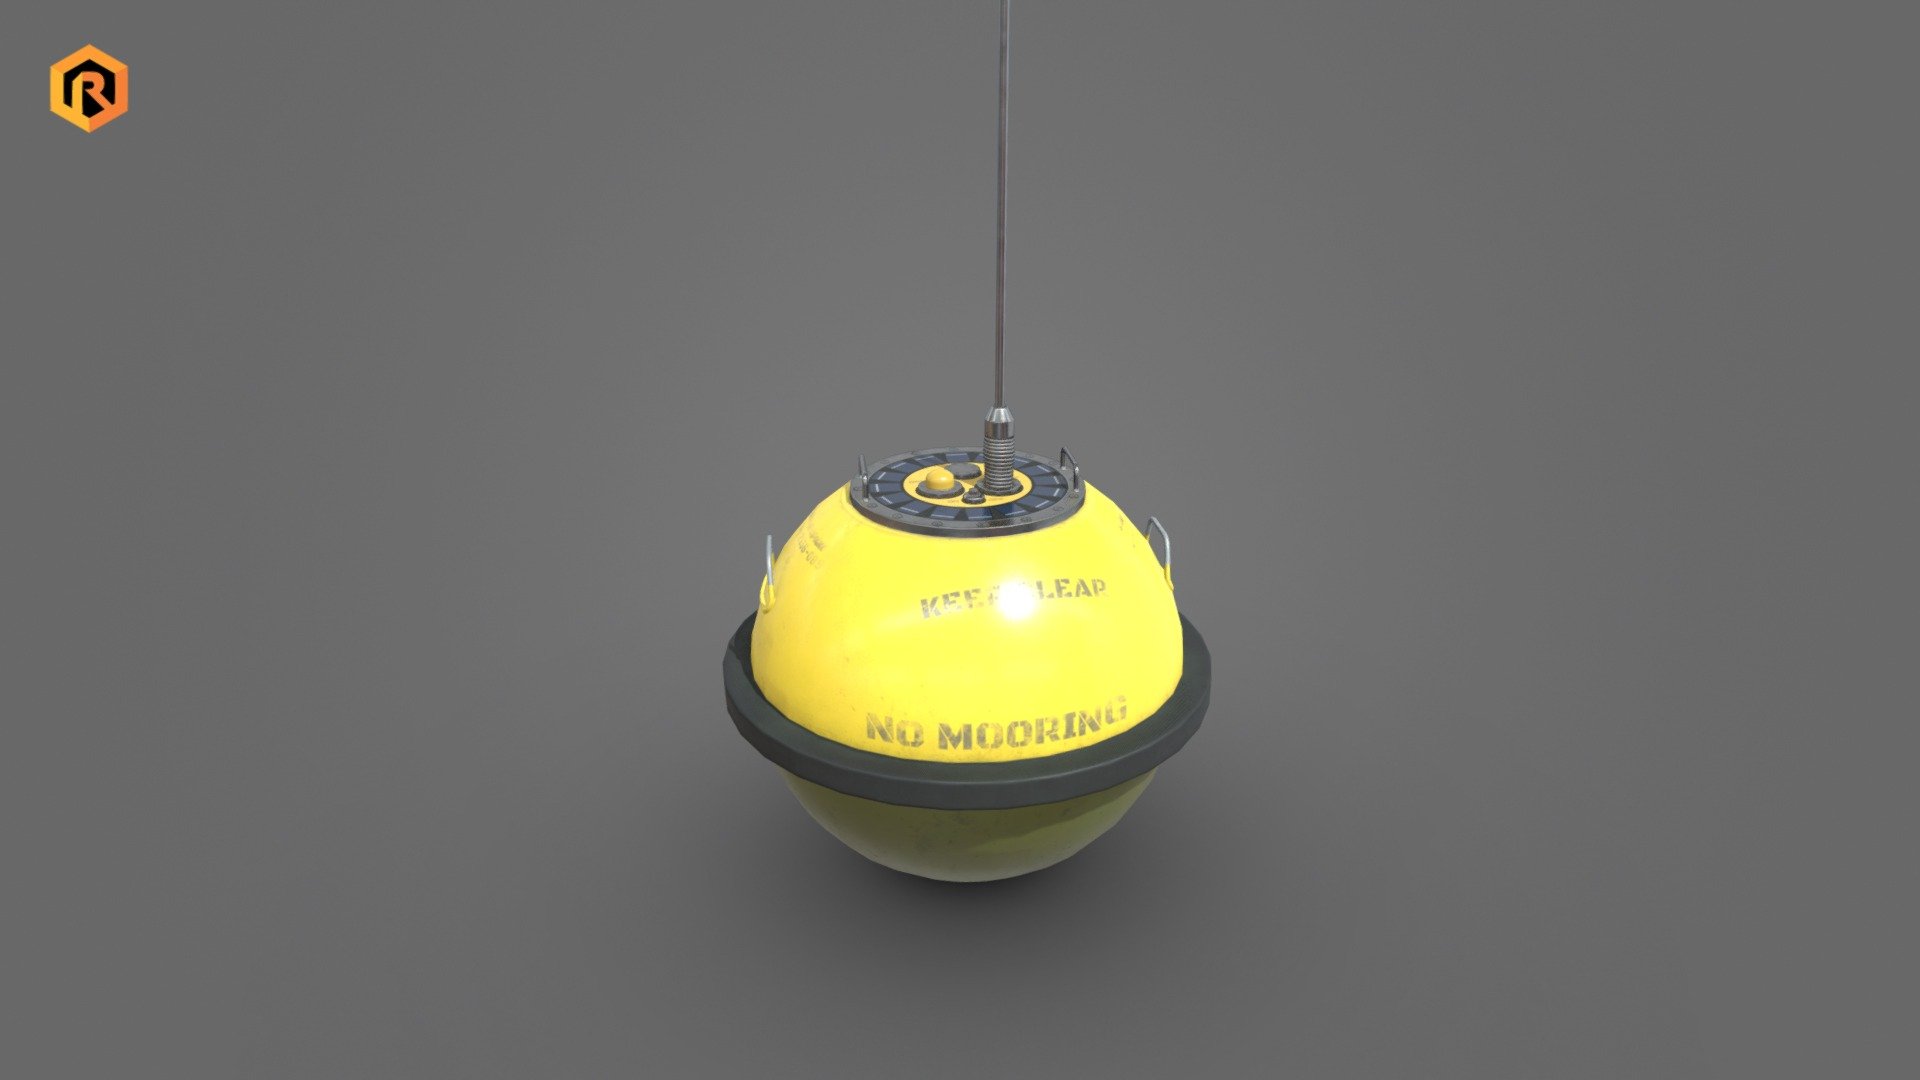 Low-poly PBR 3D model of Wave Measurement Buoy.

This object is best for use in games and other real-time applications such as Unity or Unreal Engine. 

It can also be rendered in Blender (ex Cycles) or Vray as the model is equipped with all required textures.   

Technical details:  


4096 PBR Texture Set (Albedo, Metallic, Smoothness, Normal, AO)
2928 Triangles
2133  Vertices
Model is one mesh
Pivot points are correctly placed
Model scaled to approximate real world size  
All nodes, materials and textures are appropriately named
Lot of additional file formats included (Blender, Unity, Maya etc.)

More file formats are available in additional zip file on product page !  

Please feel free to contact me if you have any questions or need support for this asset 3d model